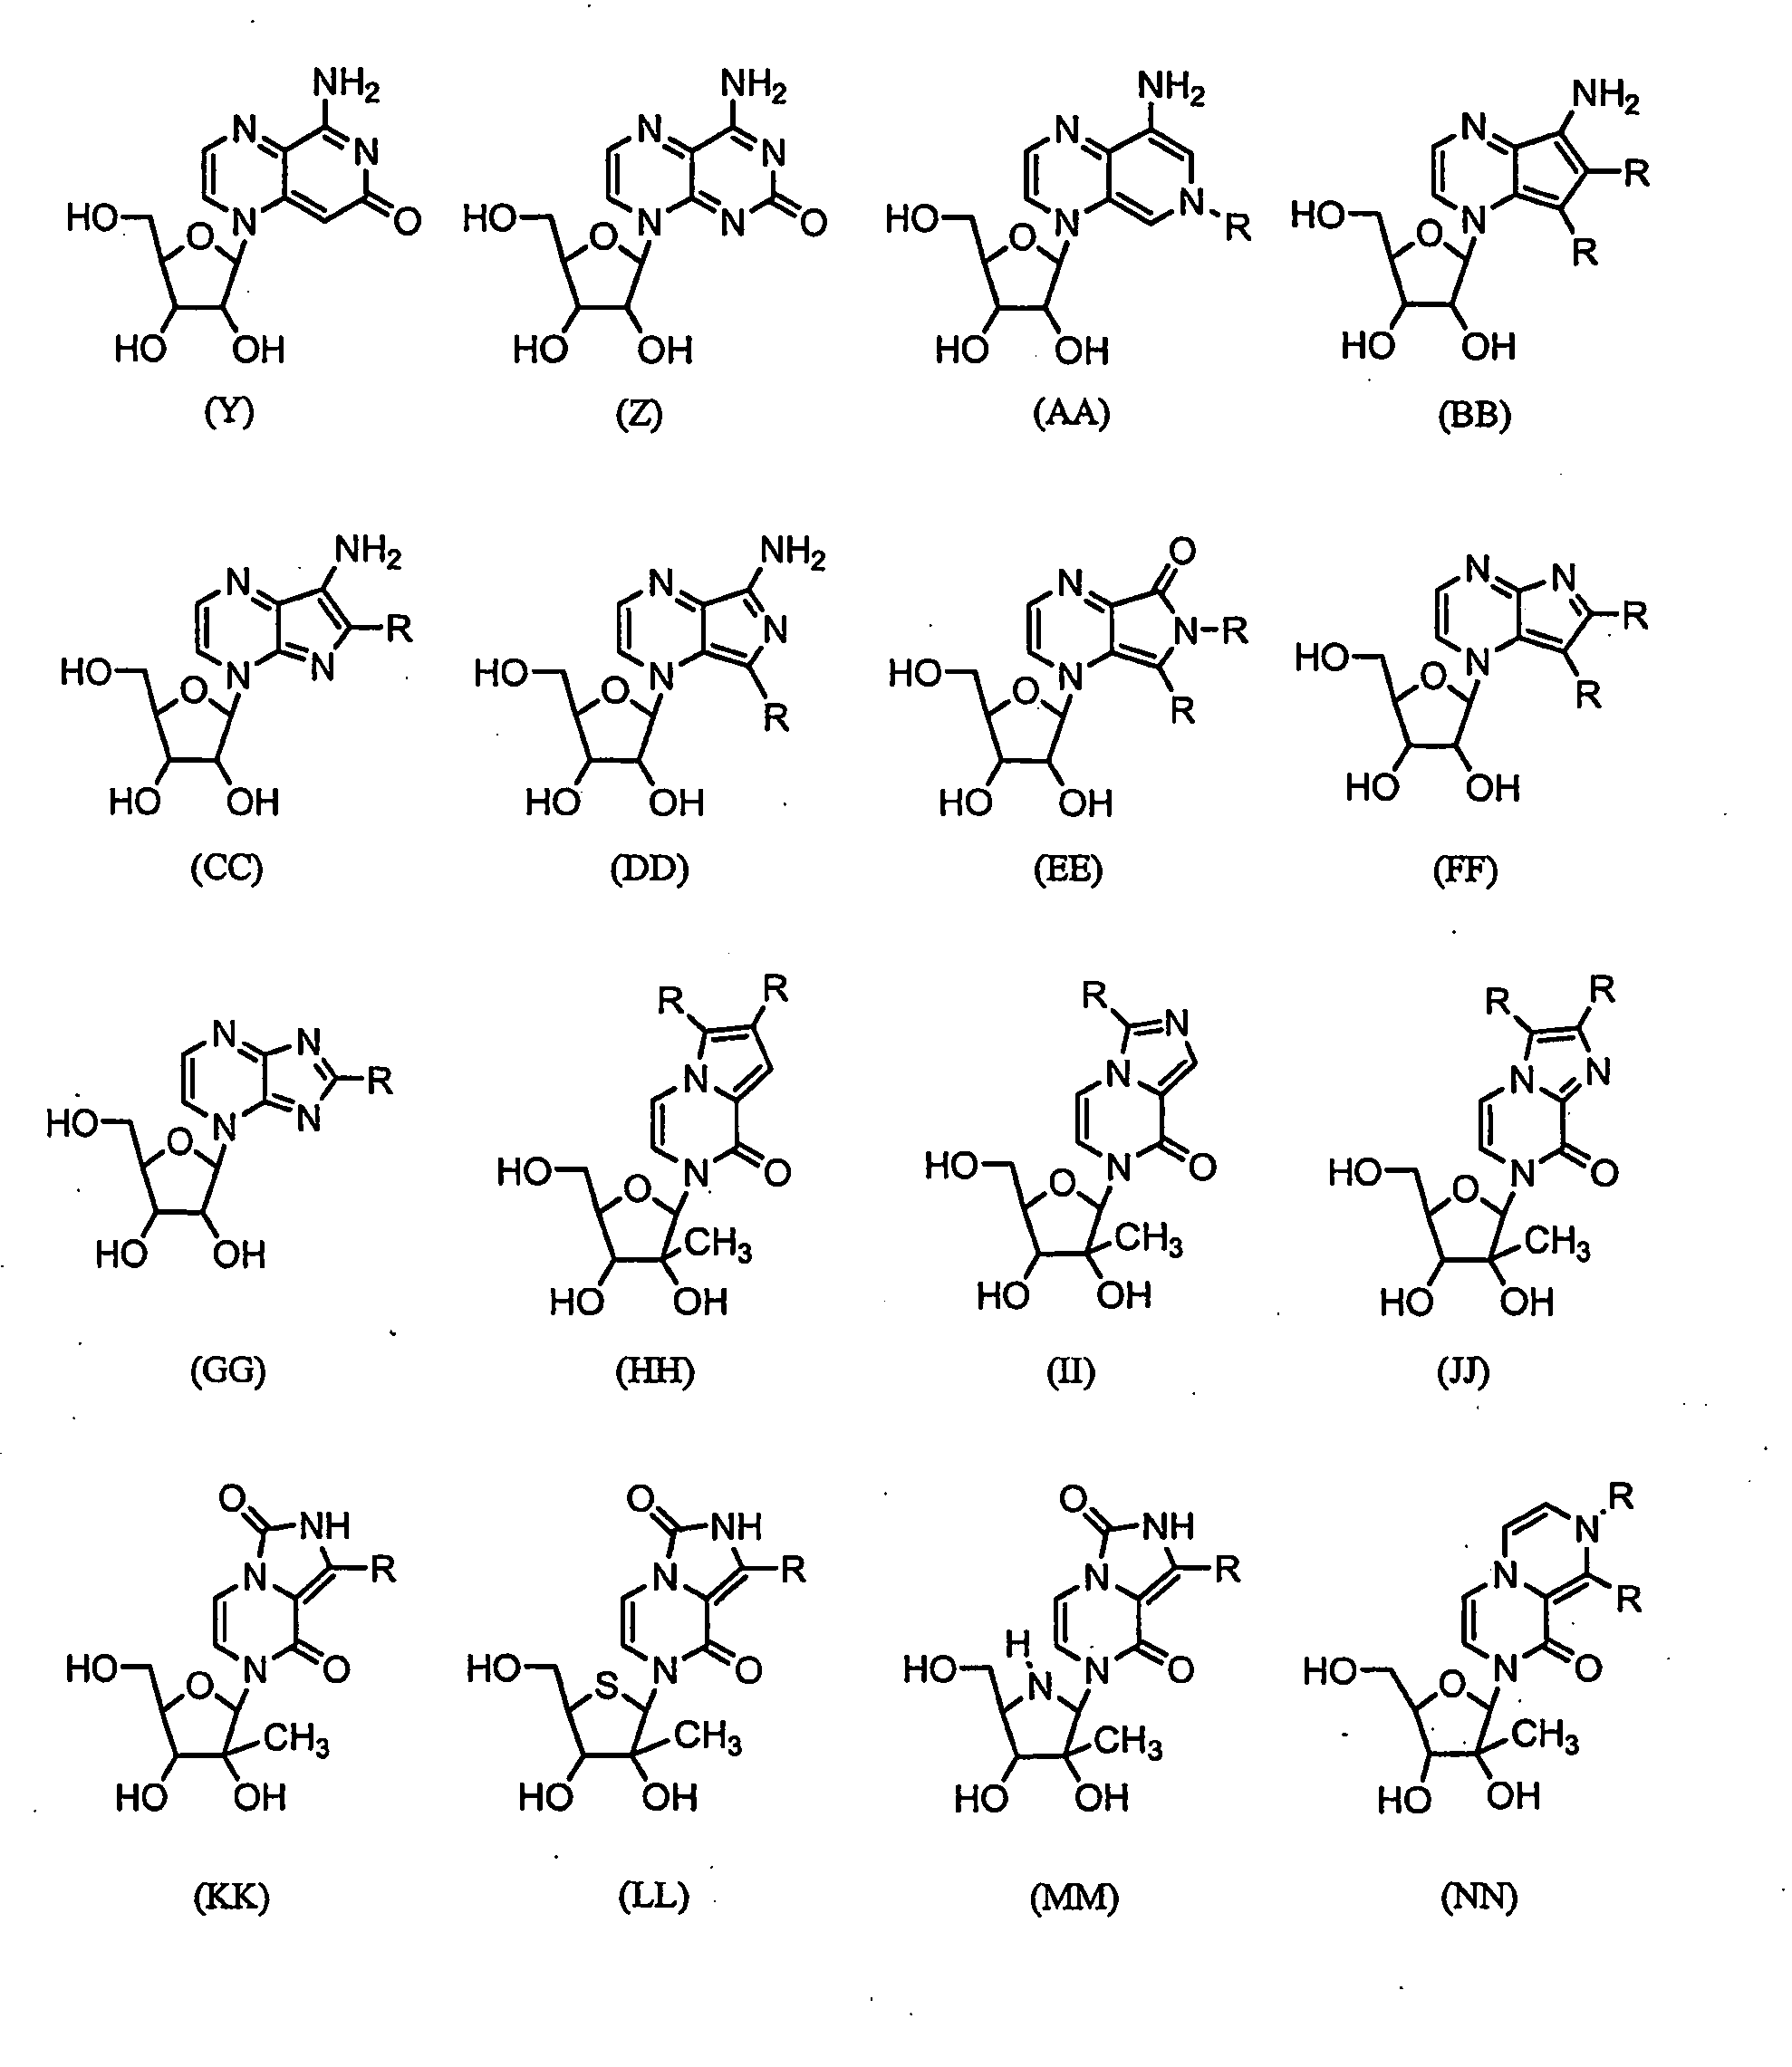 Nucleosides With Non-Natural Bases as Anti-Viral Agents